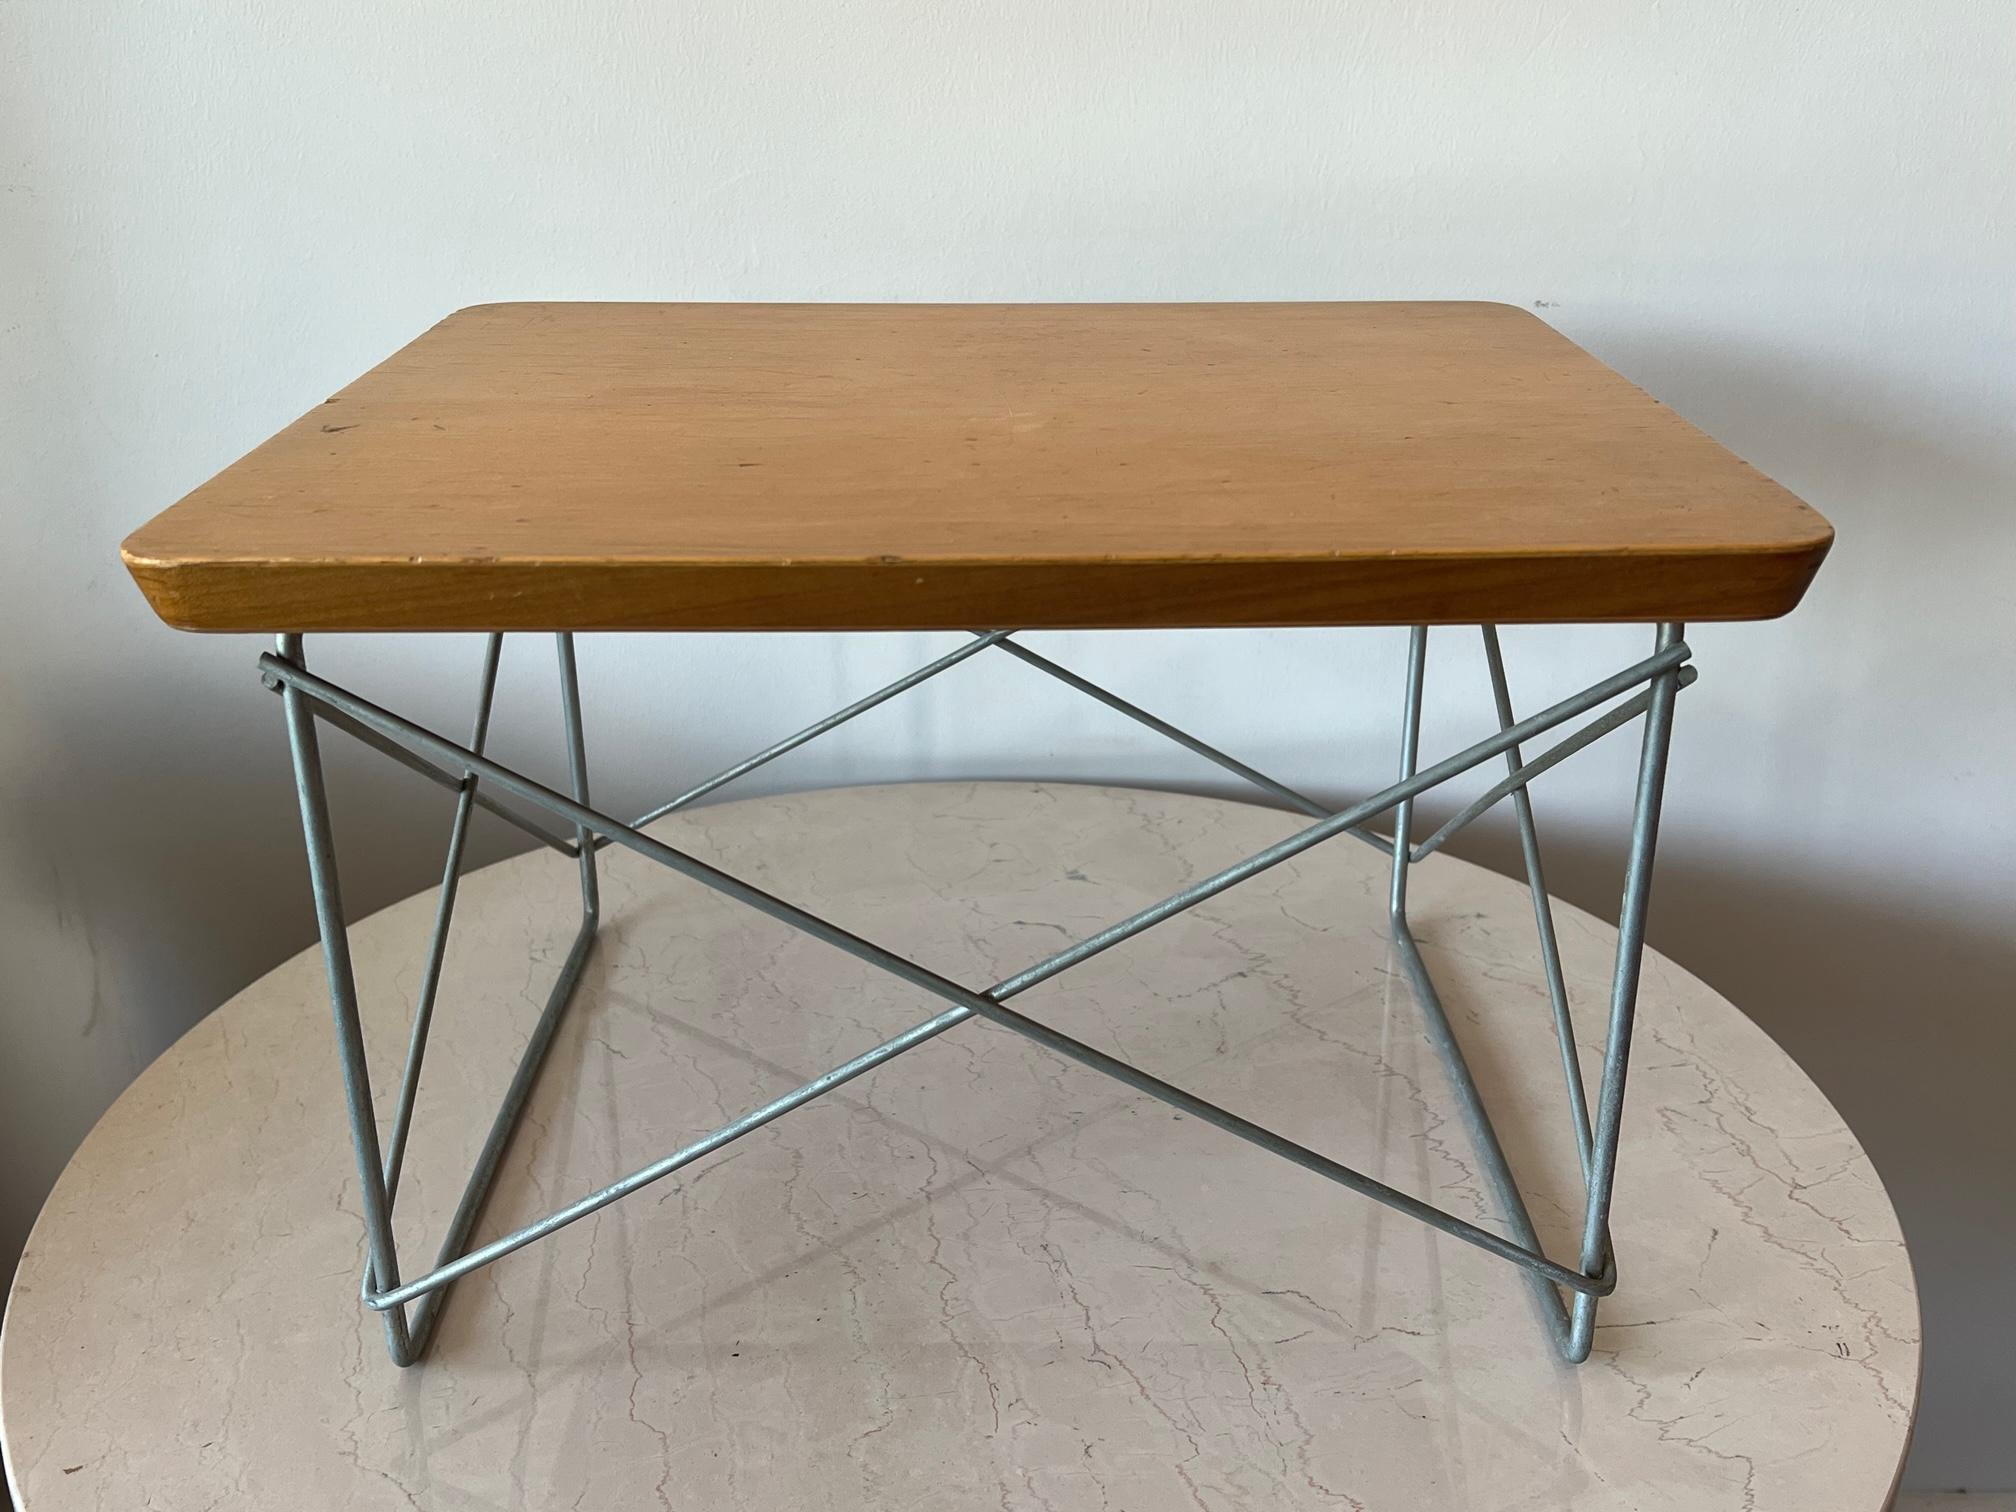 A fine Charles Eames, LTR table. Birch veneer, zinc base, all original-unrestored. Signed with a medallion label underneath.